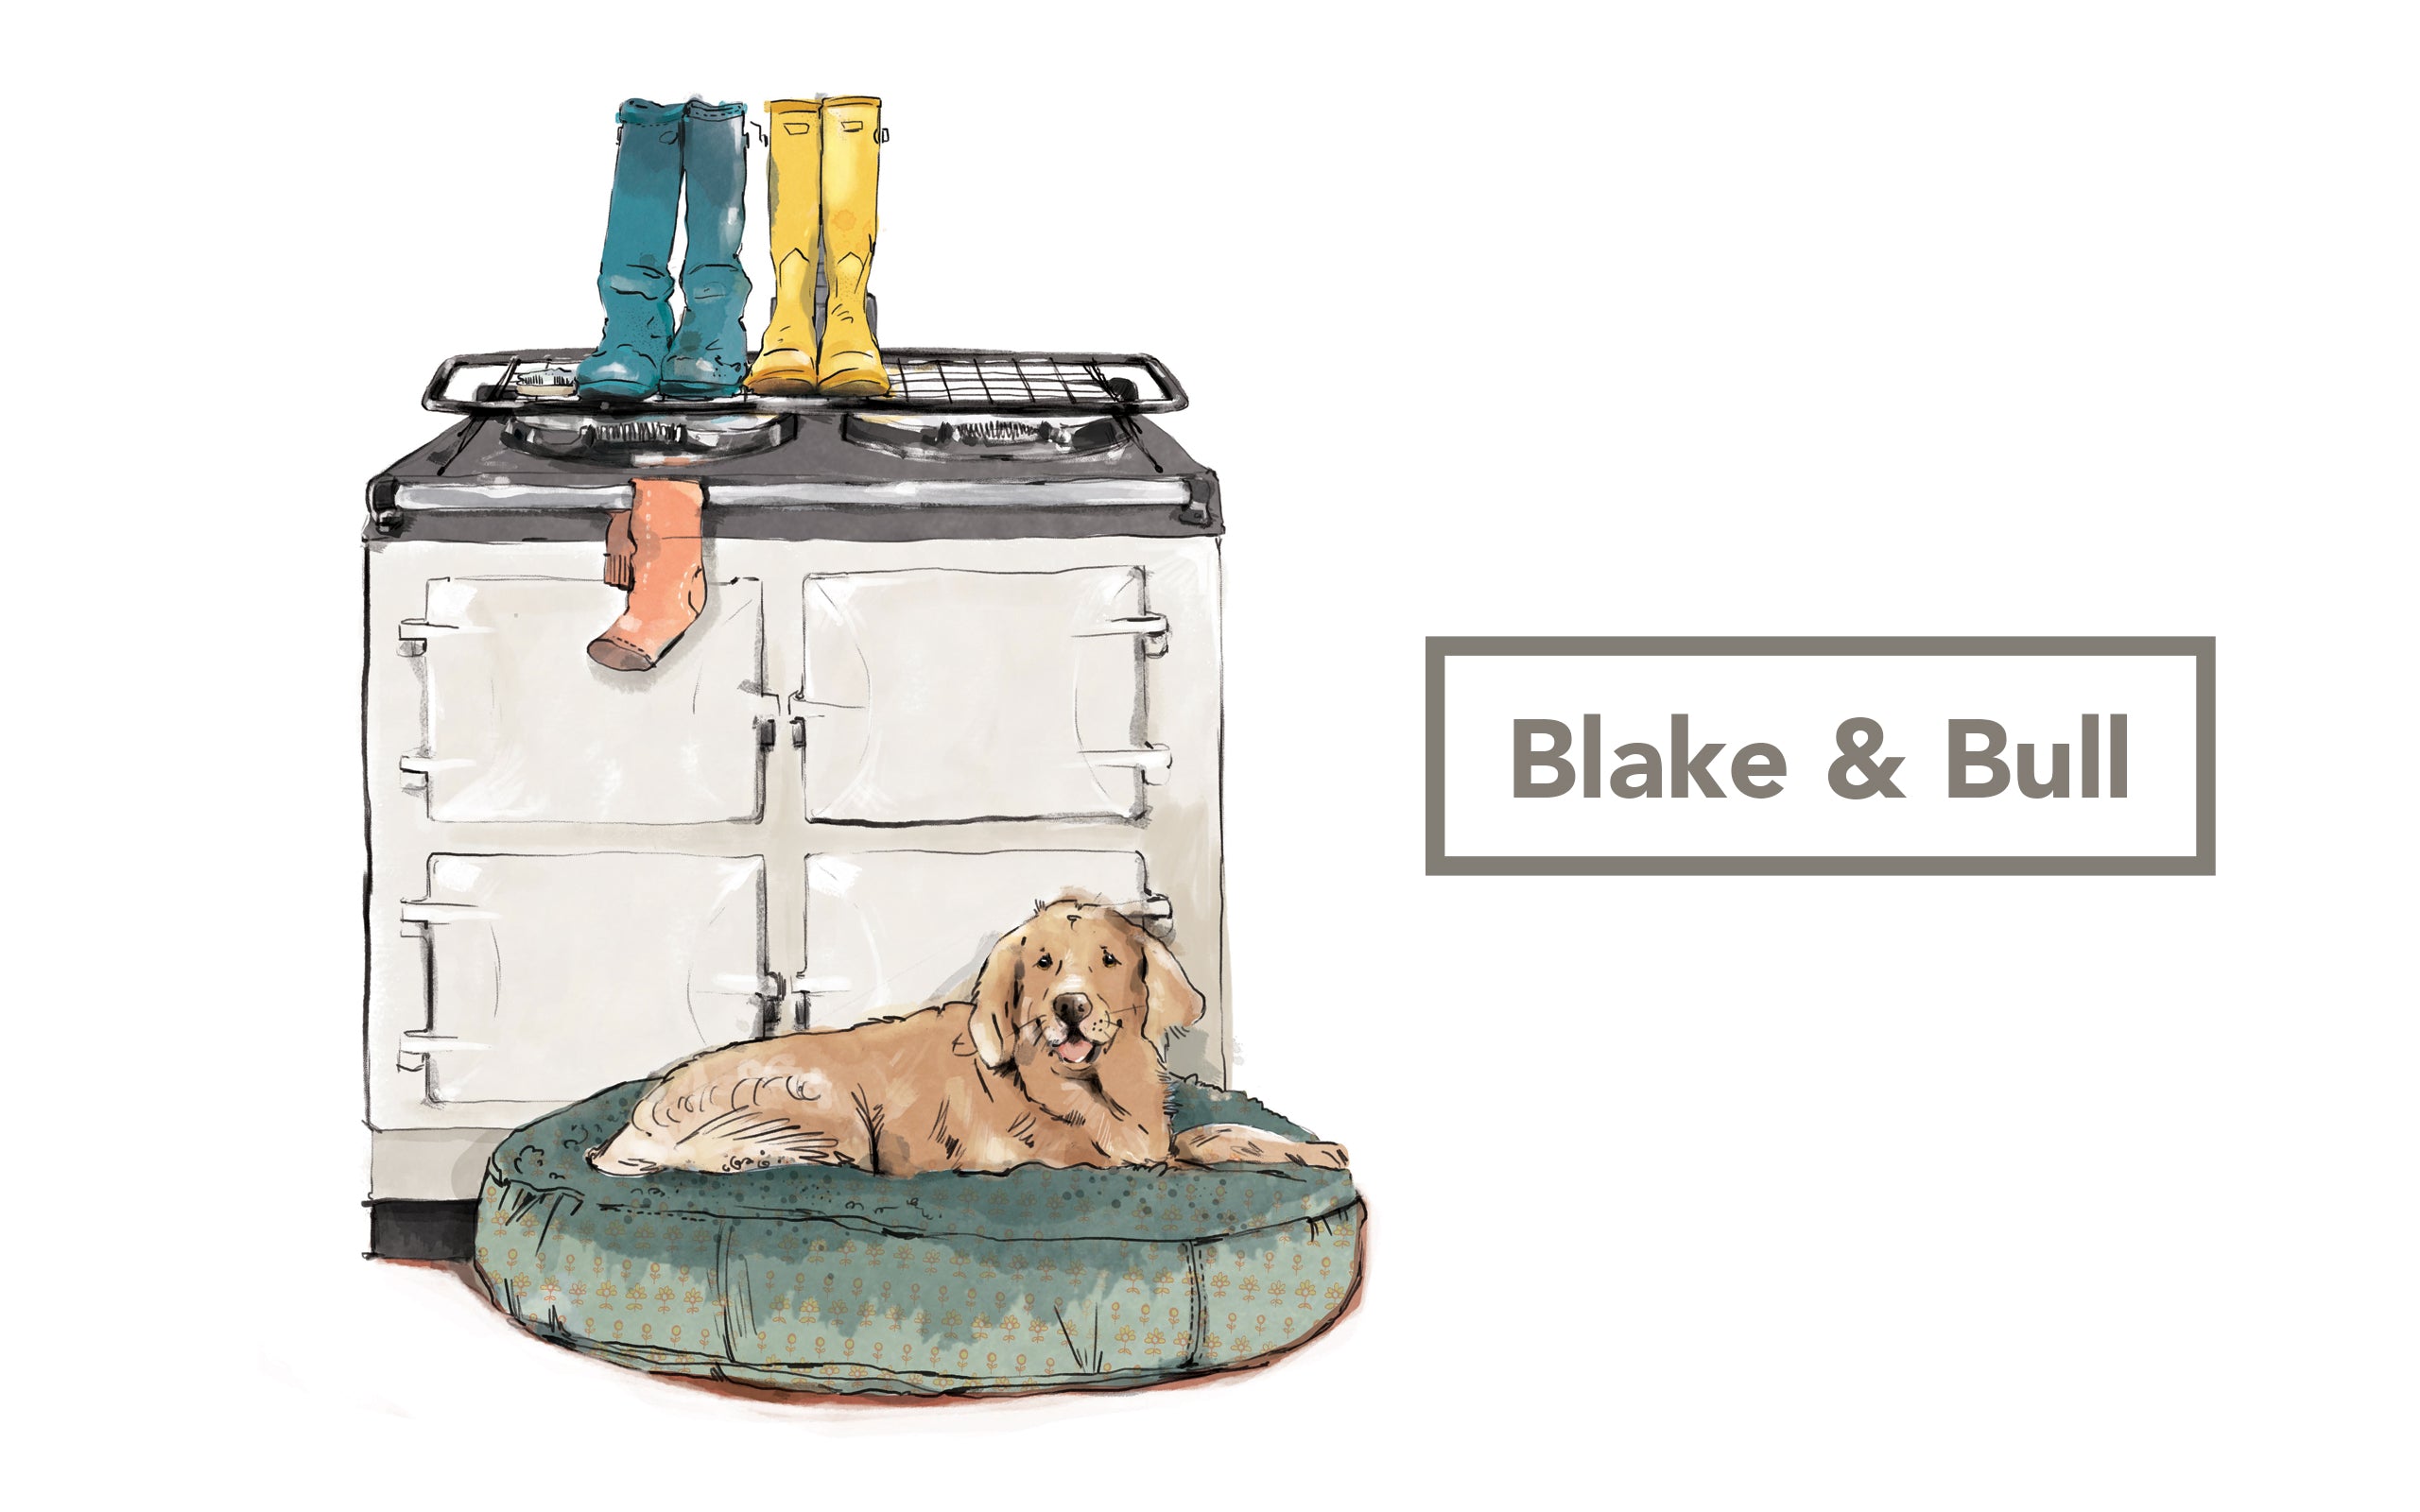 White 3 oven Aga range cooker with golden retriever lying in front and Blake & Bull logo to right.